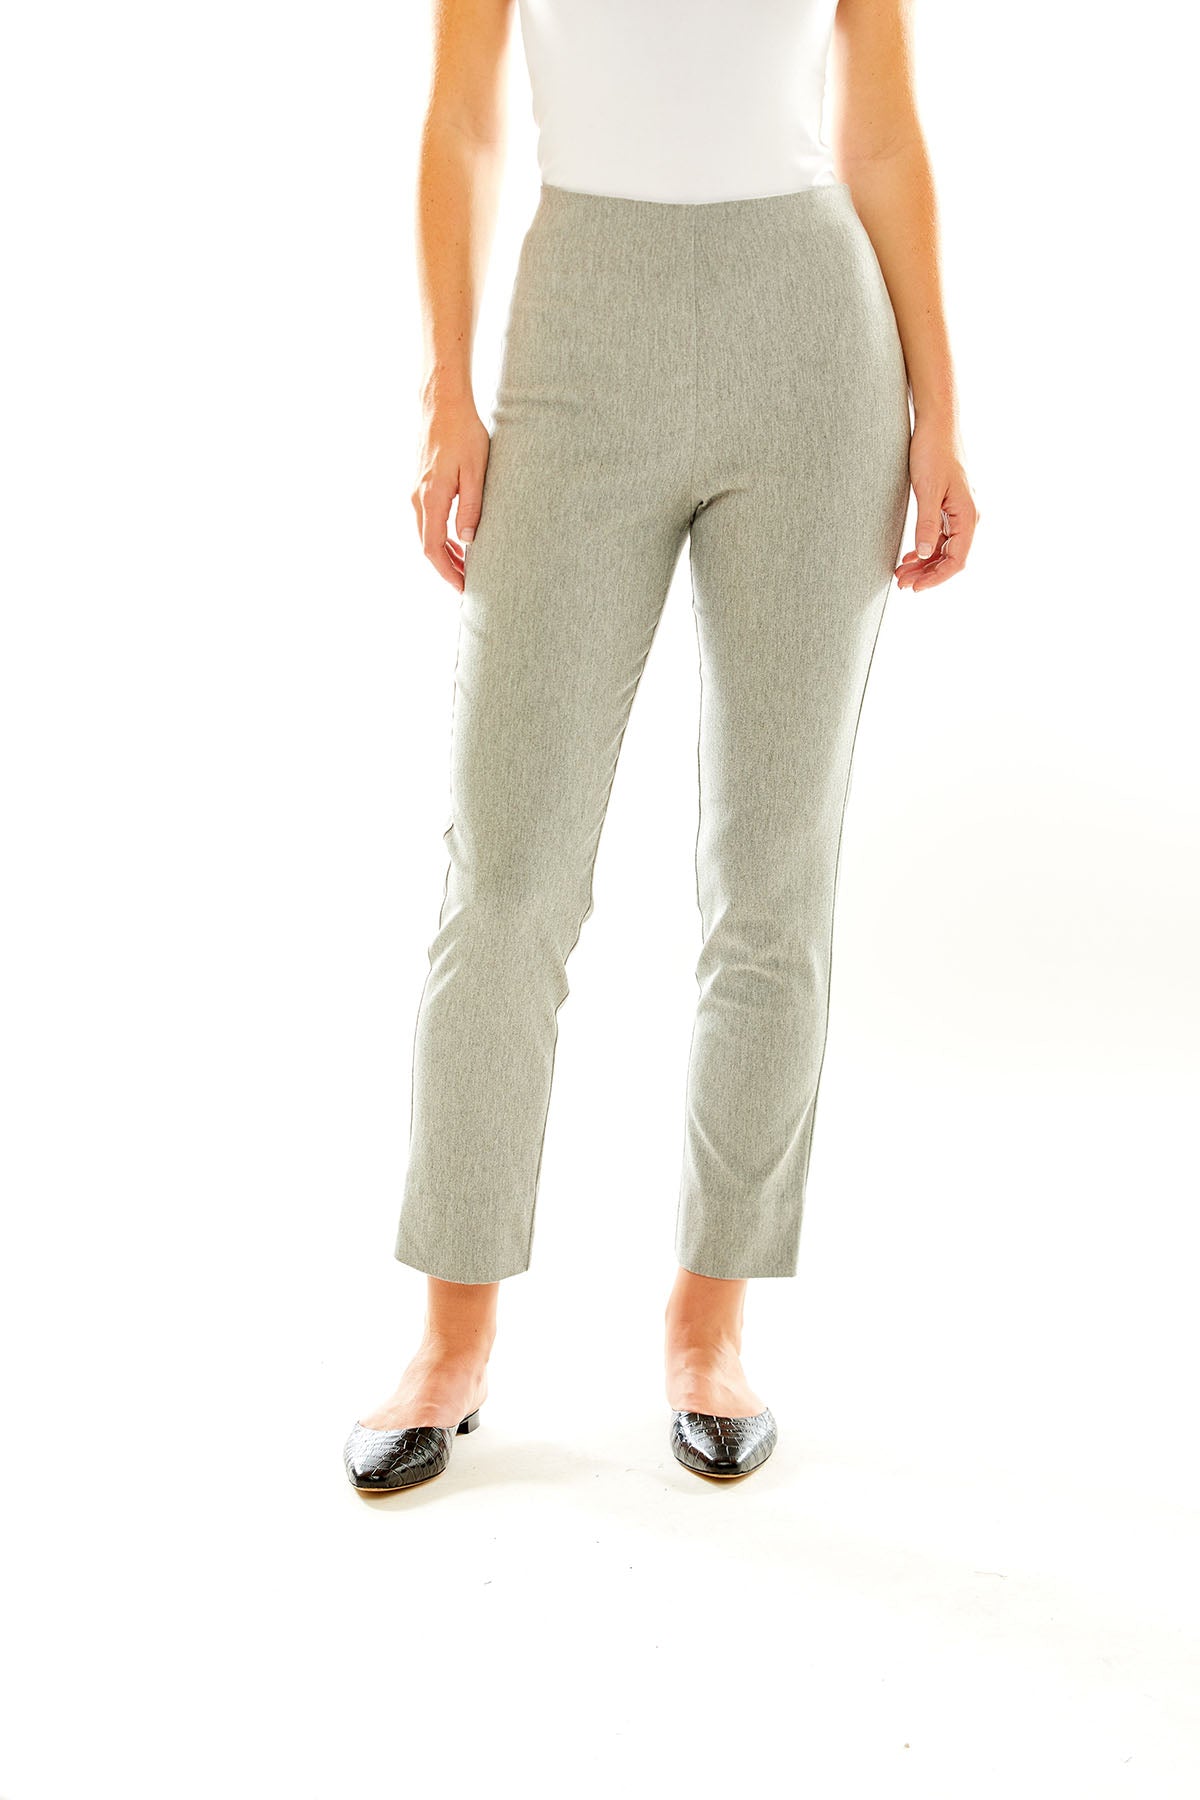 The Sara Campbell Flannel Sheri Pant in Light Grey